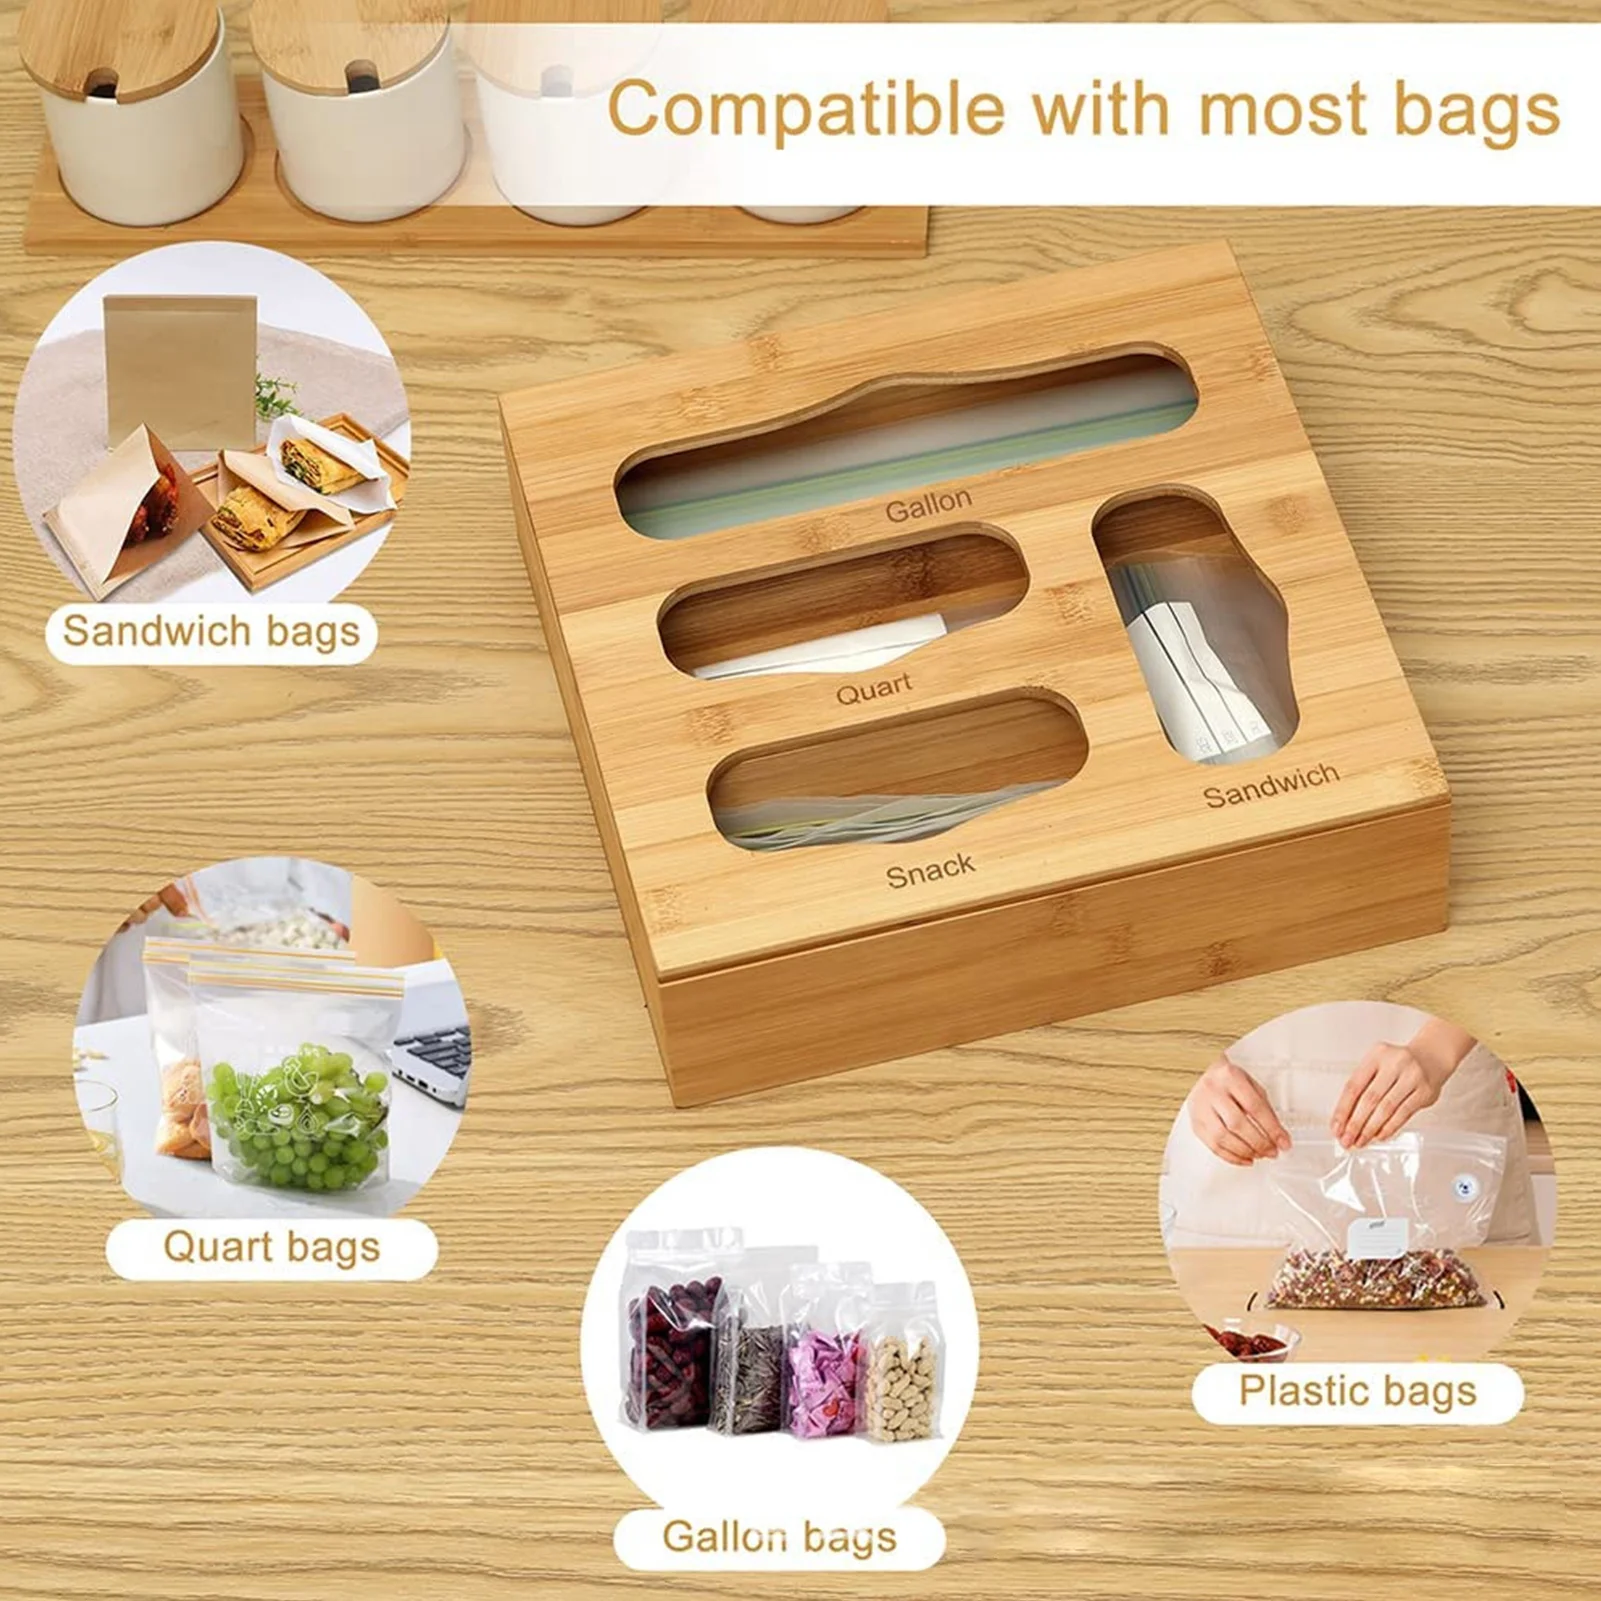 

Bamboo Ziplock Bag Storage Organizer And Dispenser For Kitchen Drawer Suitable For Gallon Sandwich & Snack Variety Size Bag